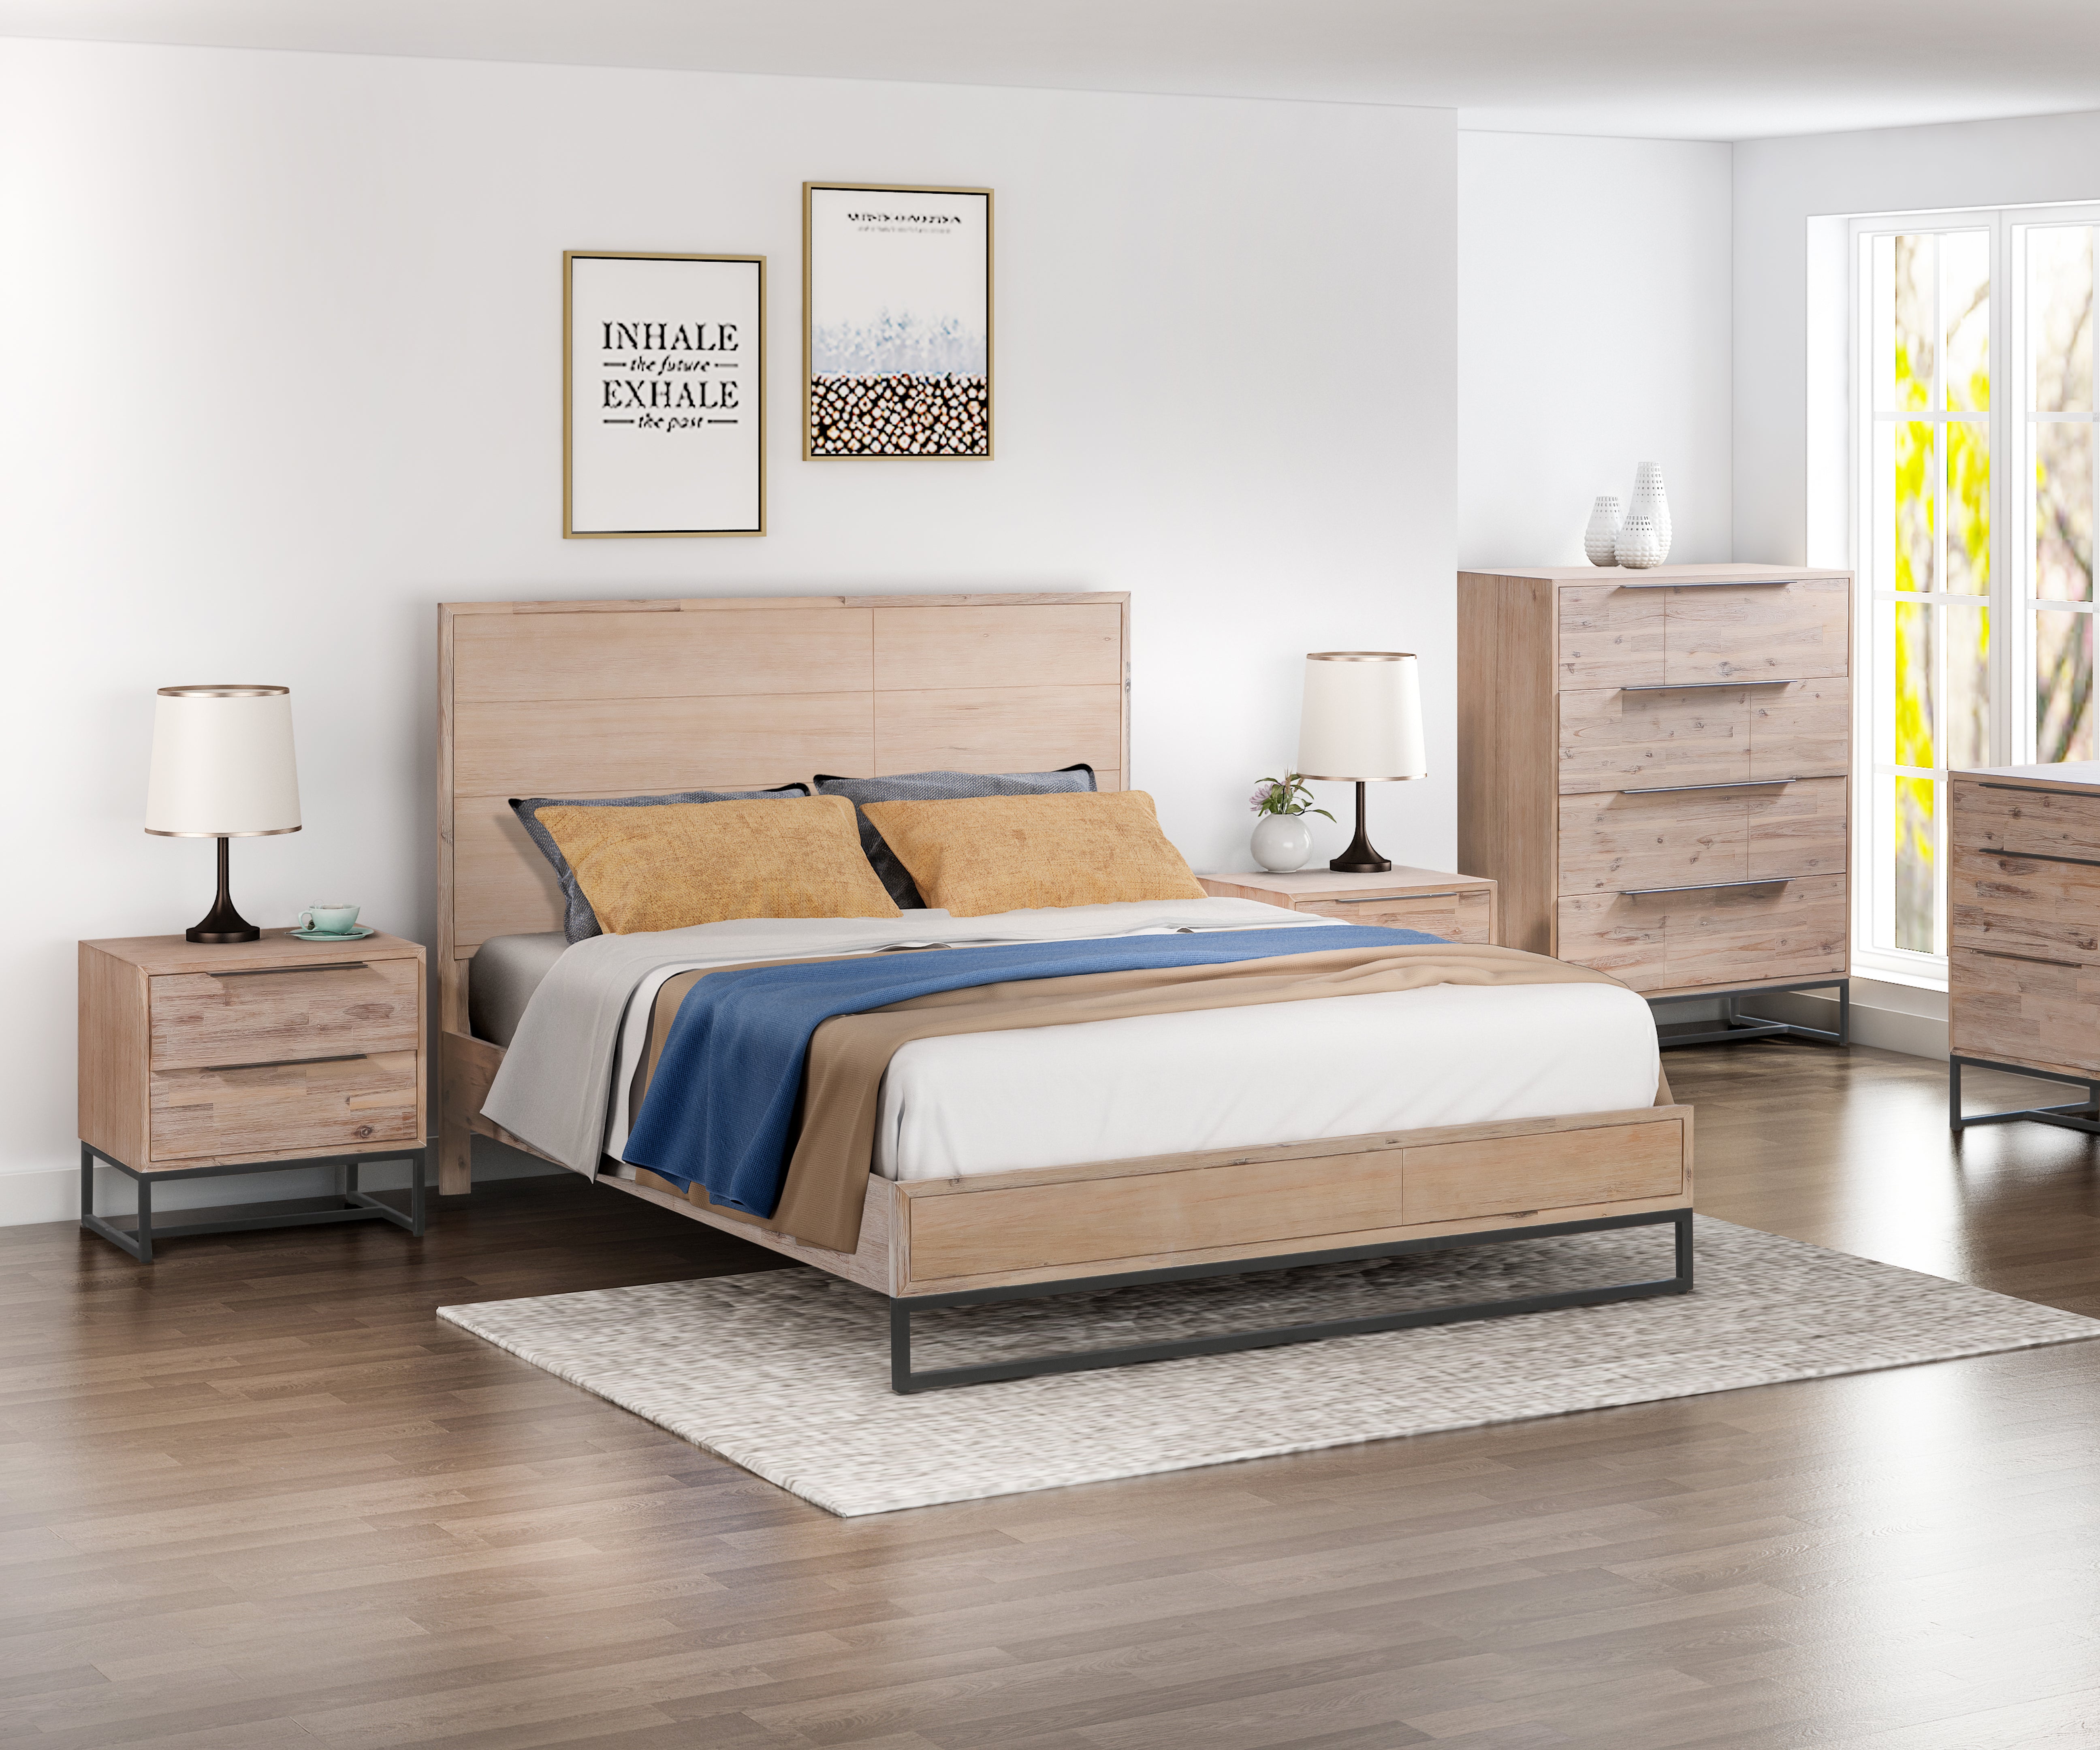 Queen Size 4 Pieces Bedroom Suite in Oak Colour 1XBed, 2X Bedside Tables & 1XTallboy